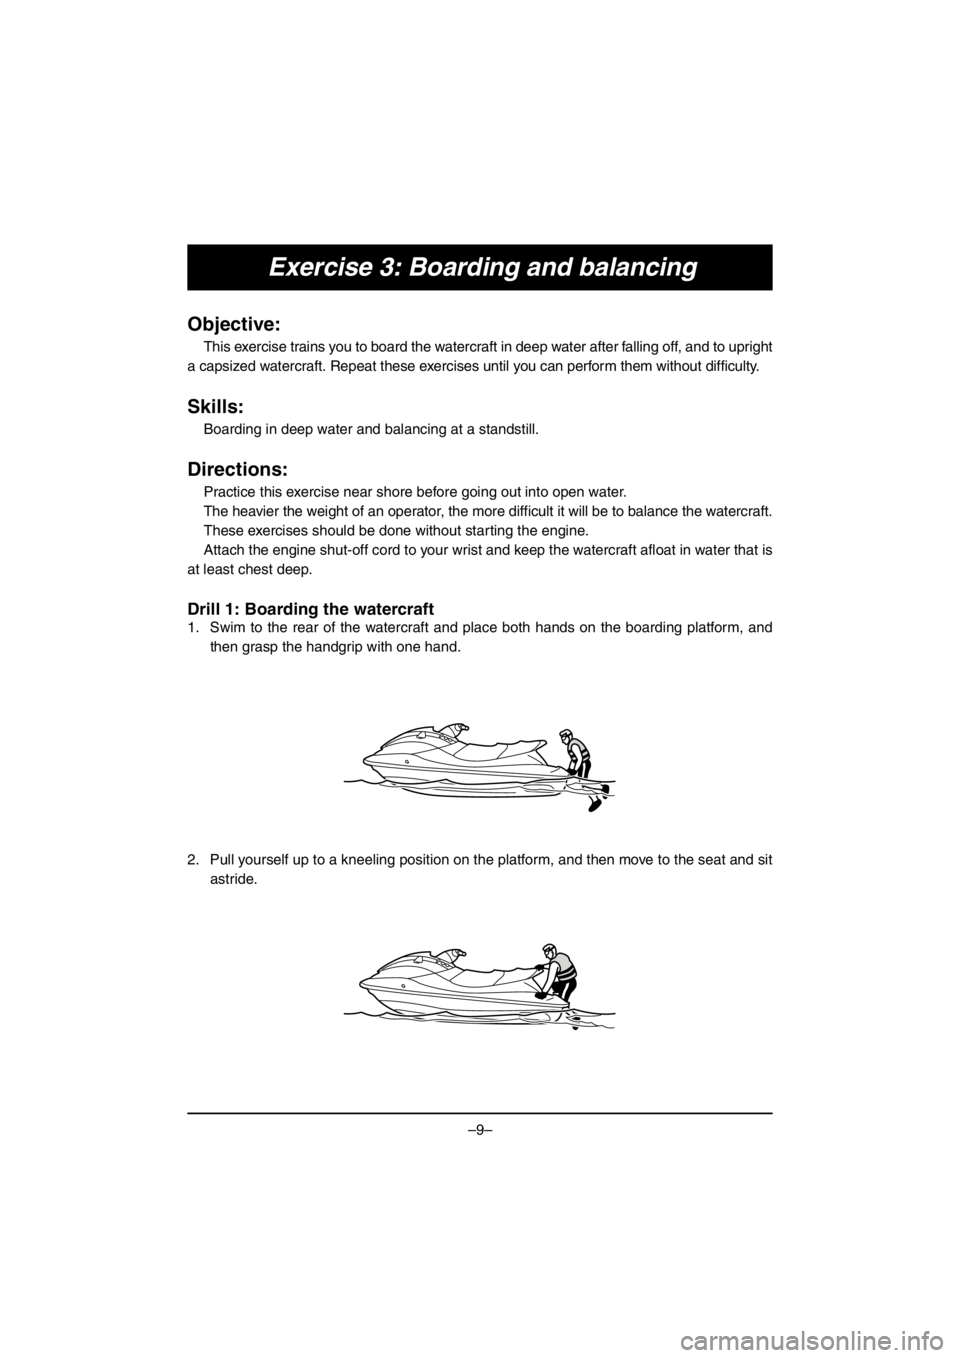 YAMAHA V1 2016  Manual de utilização (in Portuguese) –9–
Exercise 3: Boarding and balancing
Objective:
This exercise trains you to board the watercraft in deep water after falling off, and to upright
a capsized watercraft. Repeat these exercises unt